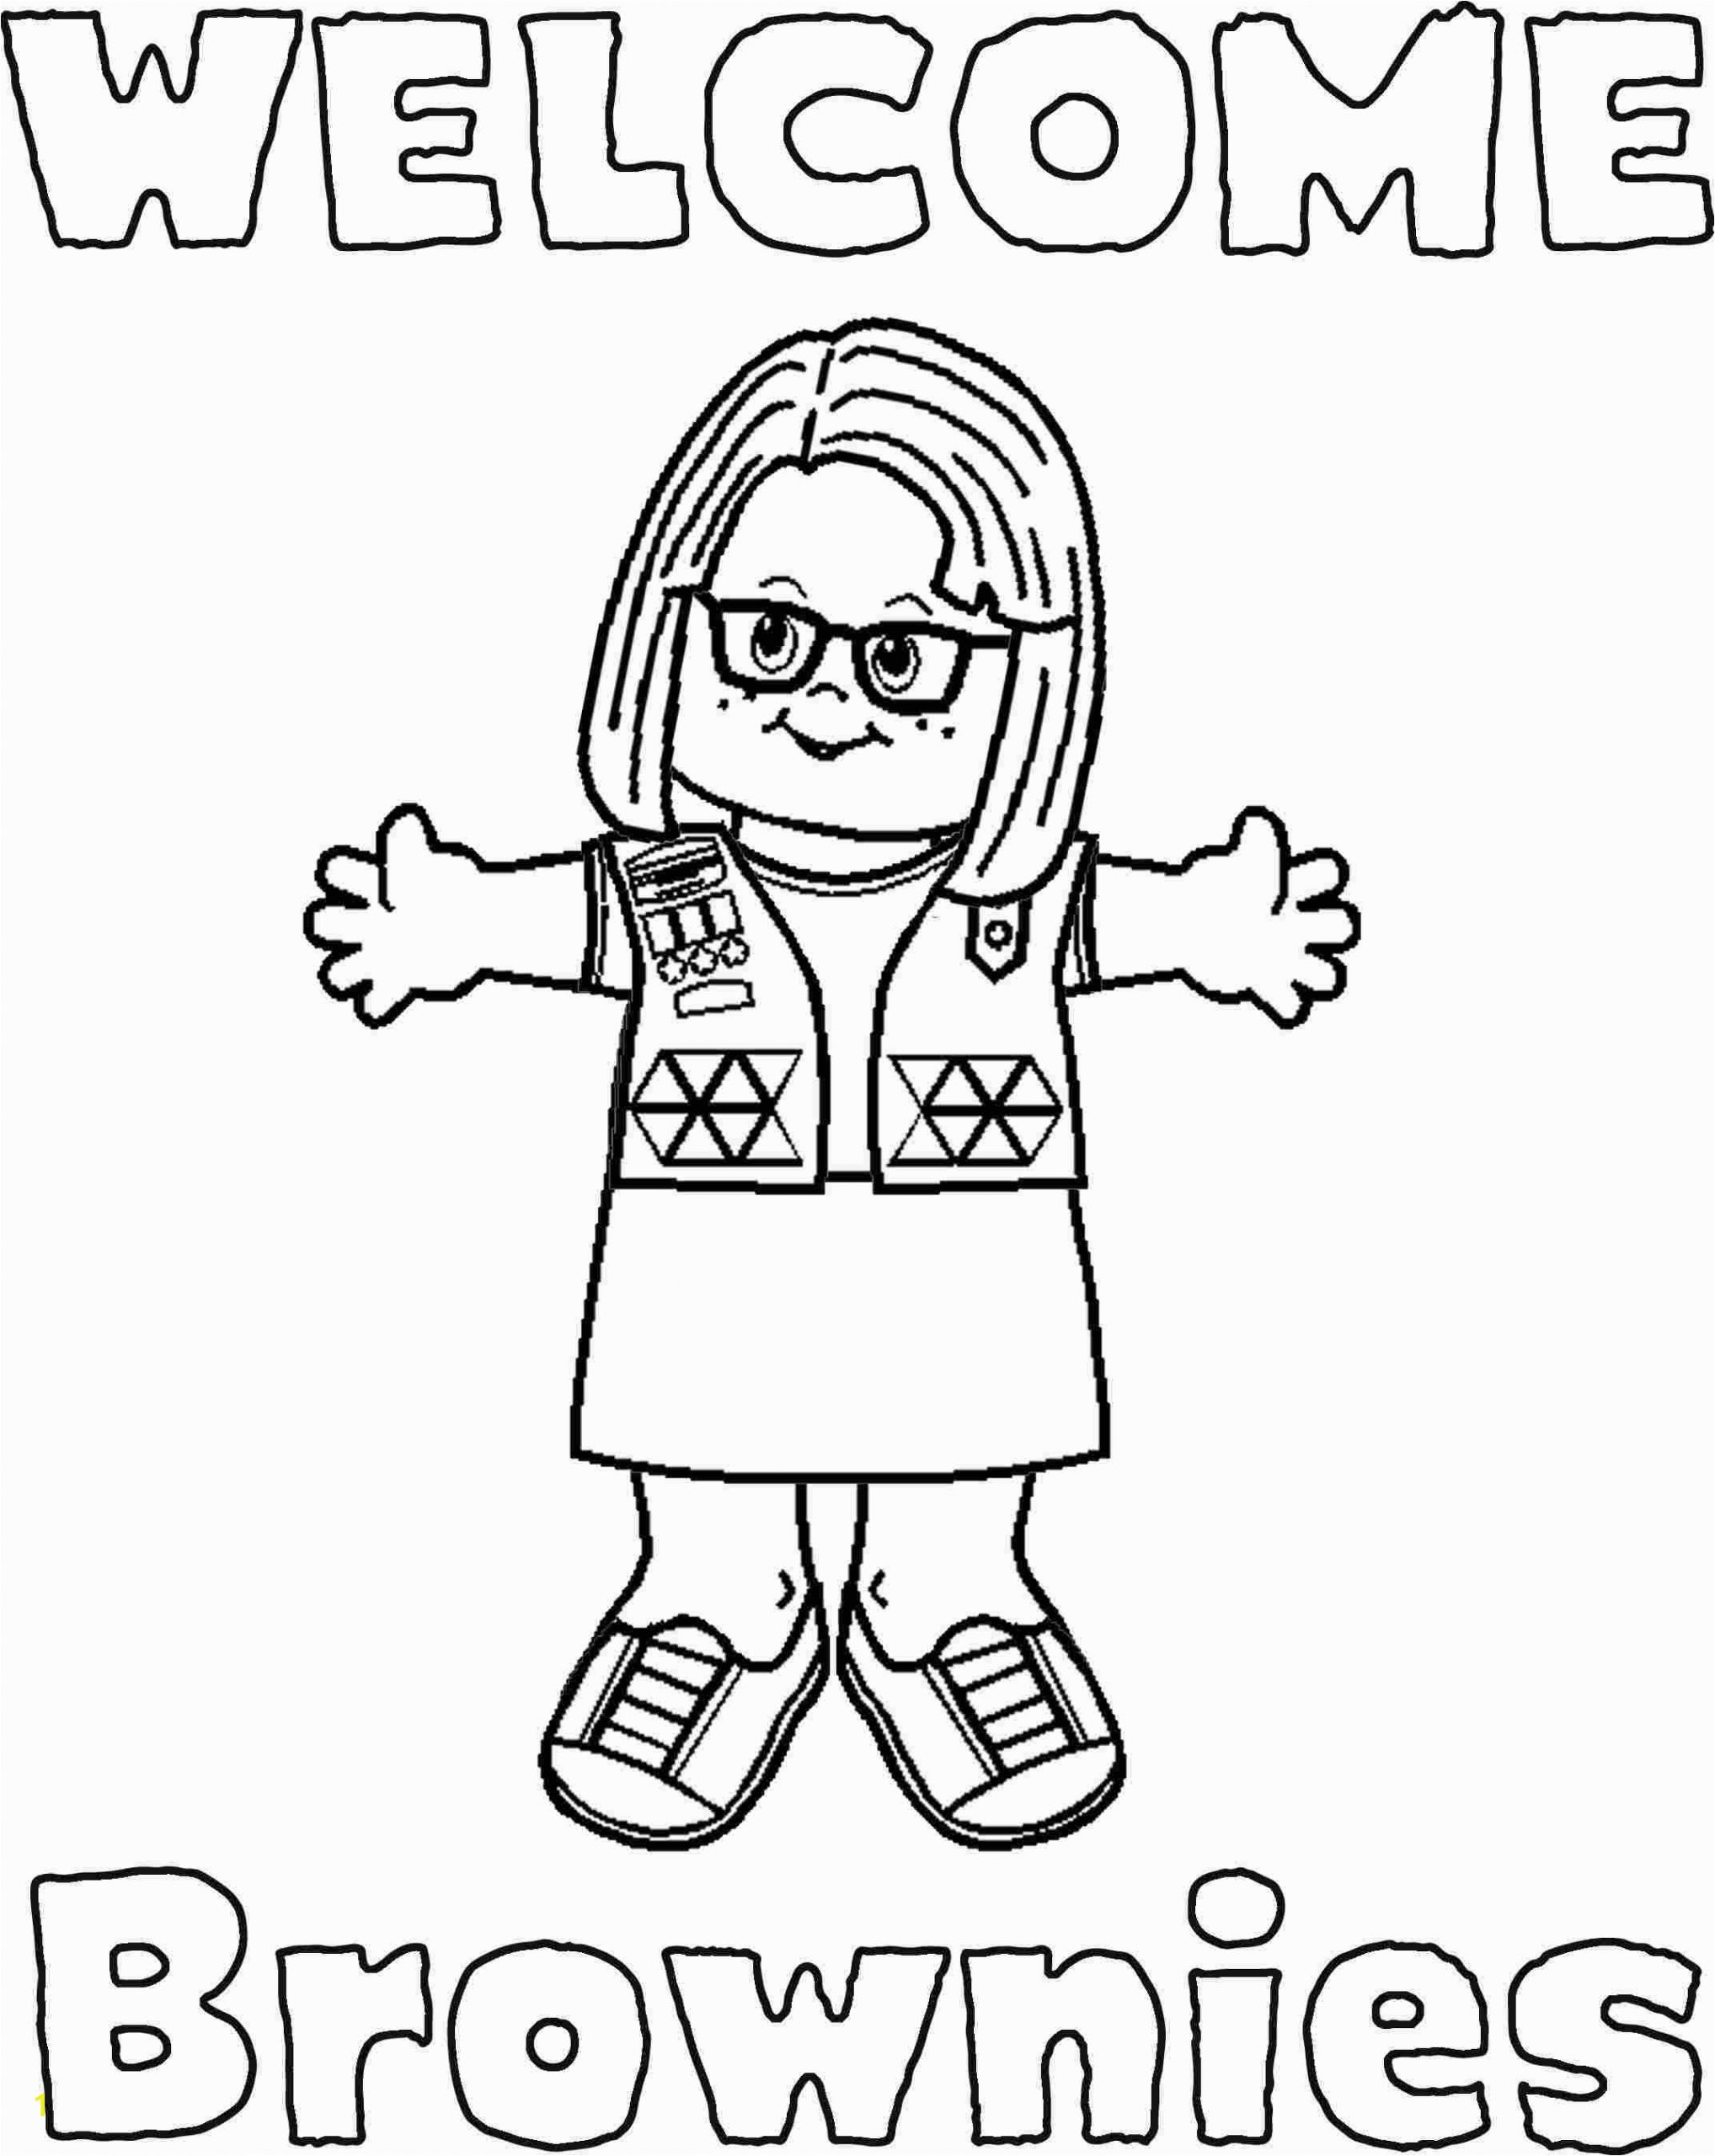 daisy girl scout printable coloring pages coloring sheet clover girl scouts daisies pinterest pages daisy printable coloring scout girl